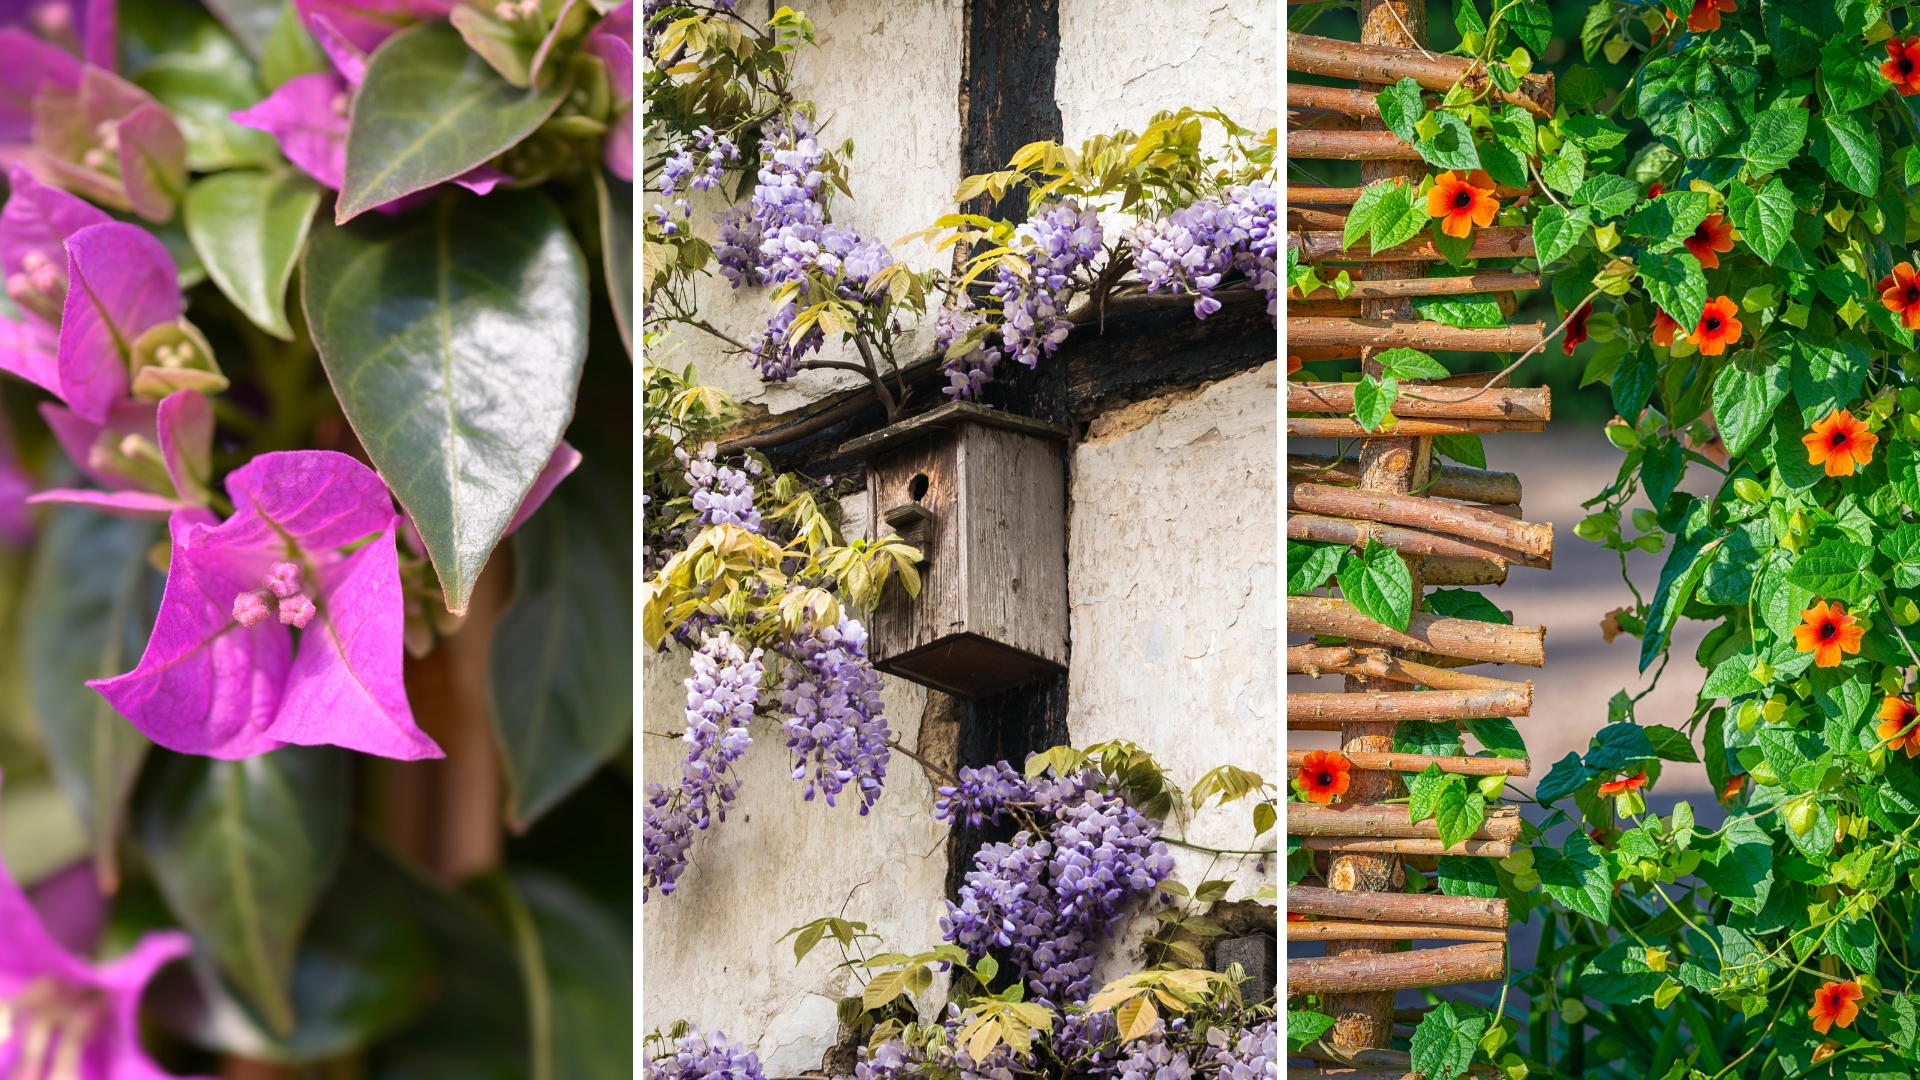 17 Well-behaved Vines For Your Arbors And Trellises